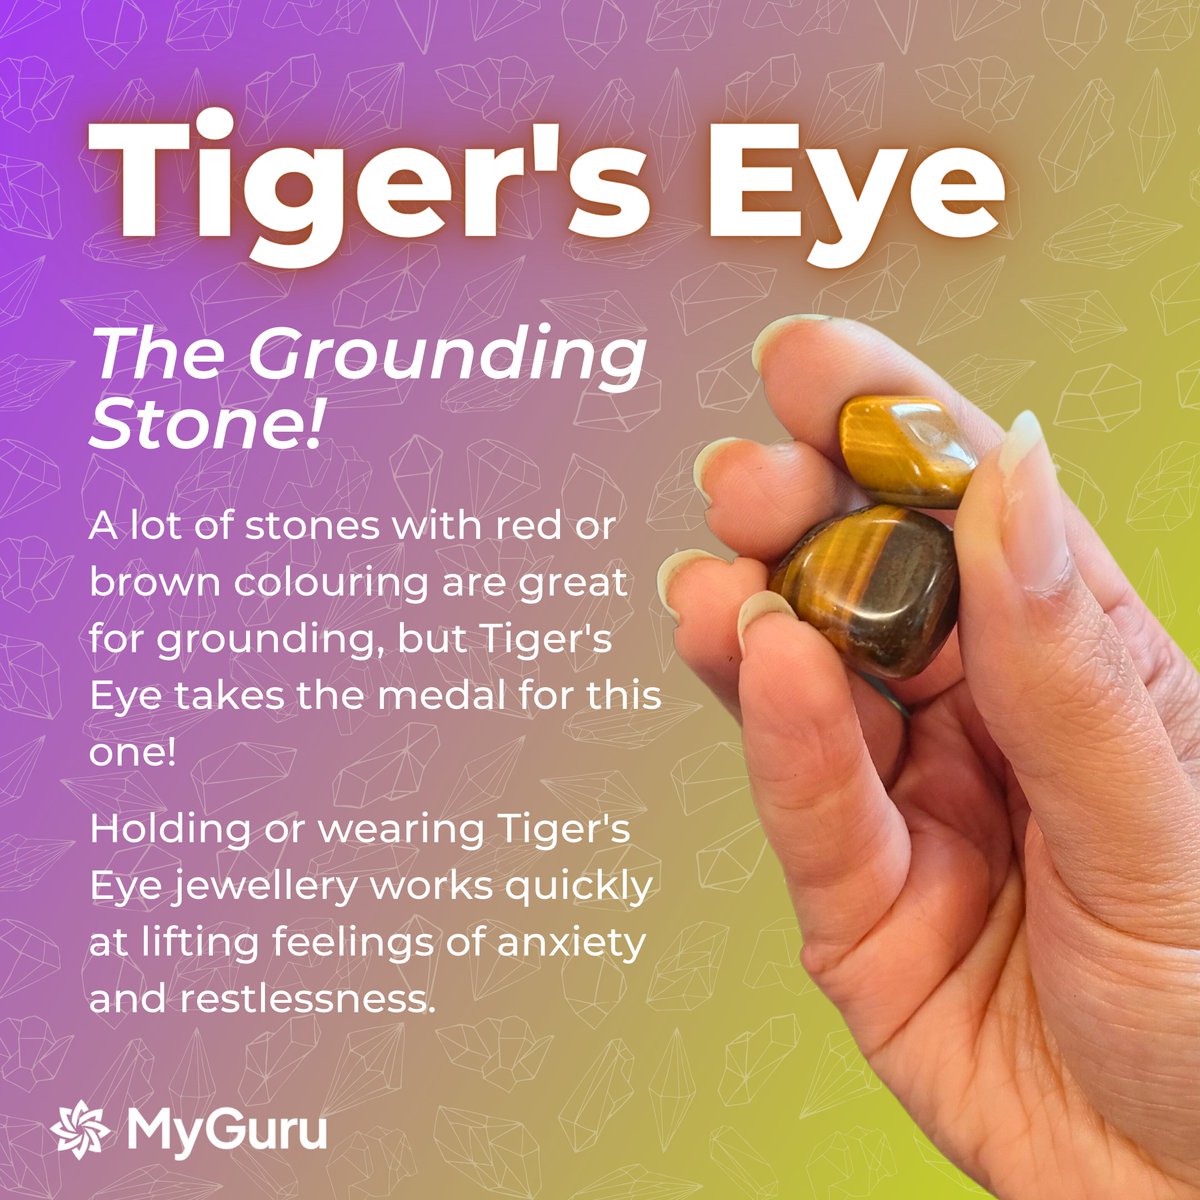 🤎 Feeling anxious? Restless? A bit away with the fairies? 🧚‍♀️
You need Tiger's Eye in your life. It's perfect for bringing you back down to earth and pulling your head out of the clouds!
#crystalmagic #crystalvibes #crystalenergy #gemstone #crystalsuk #crystals #fyp #tigerseye